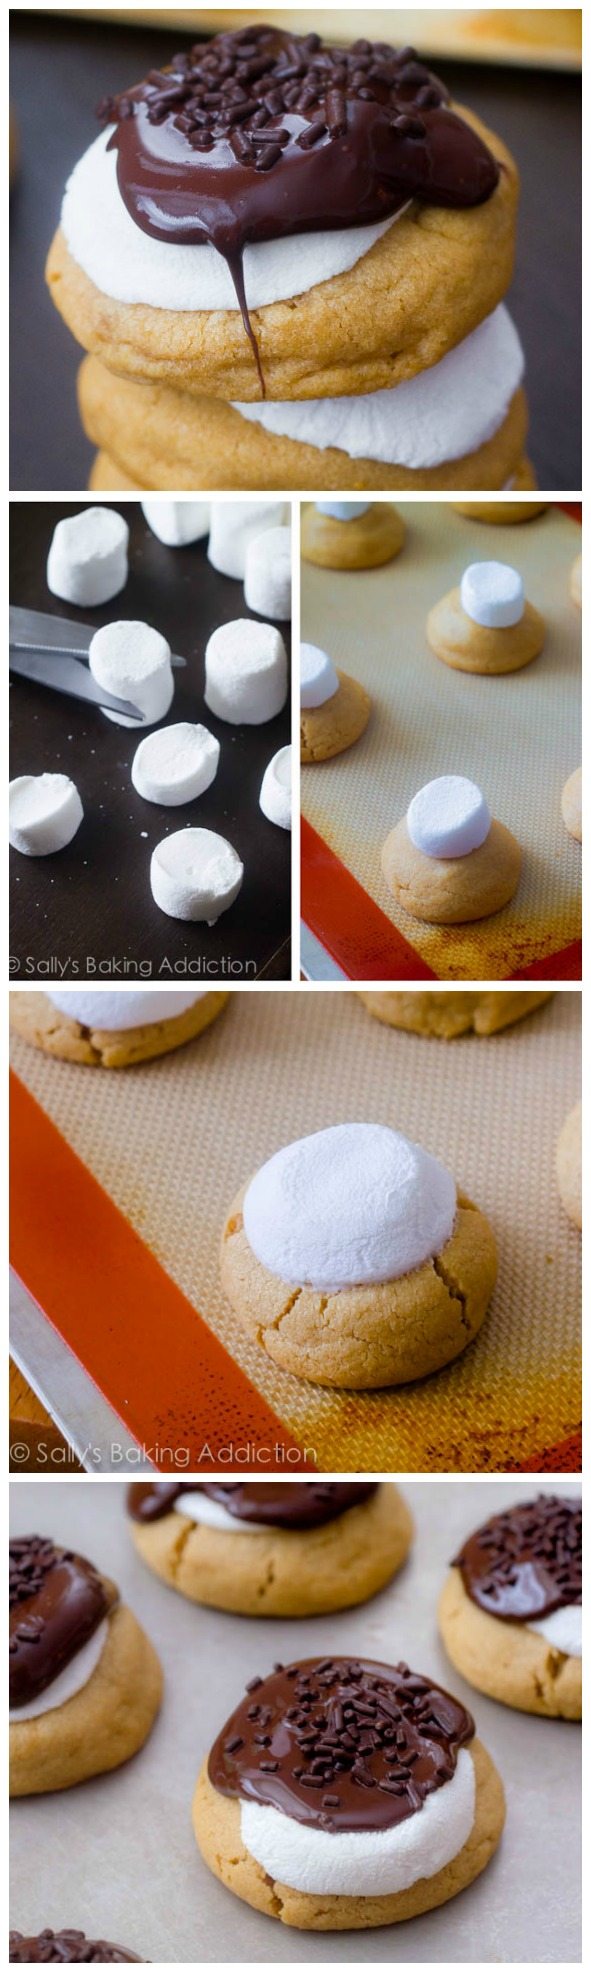 collage of 5 images showing how to make s'more peanut butter cookies